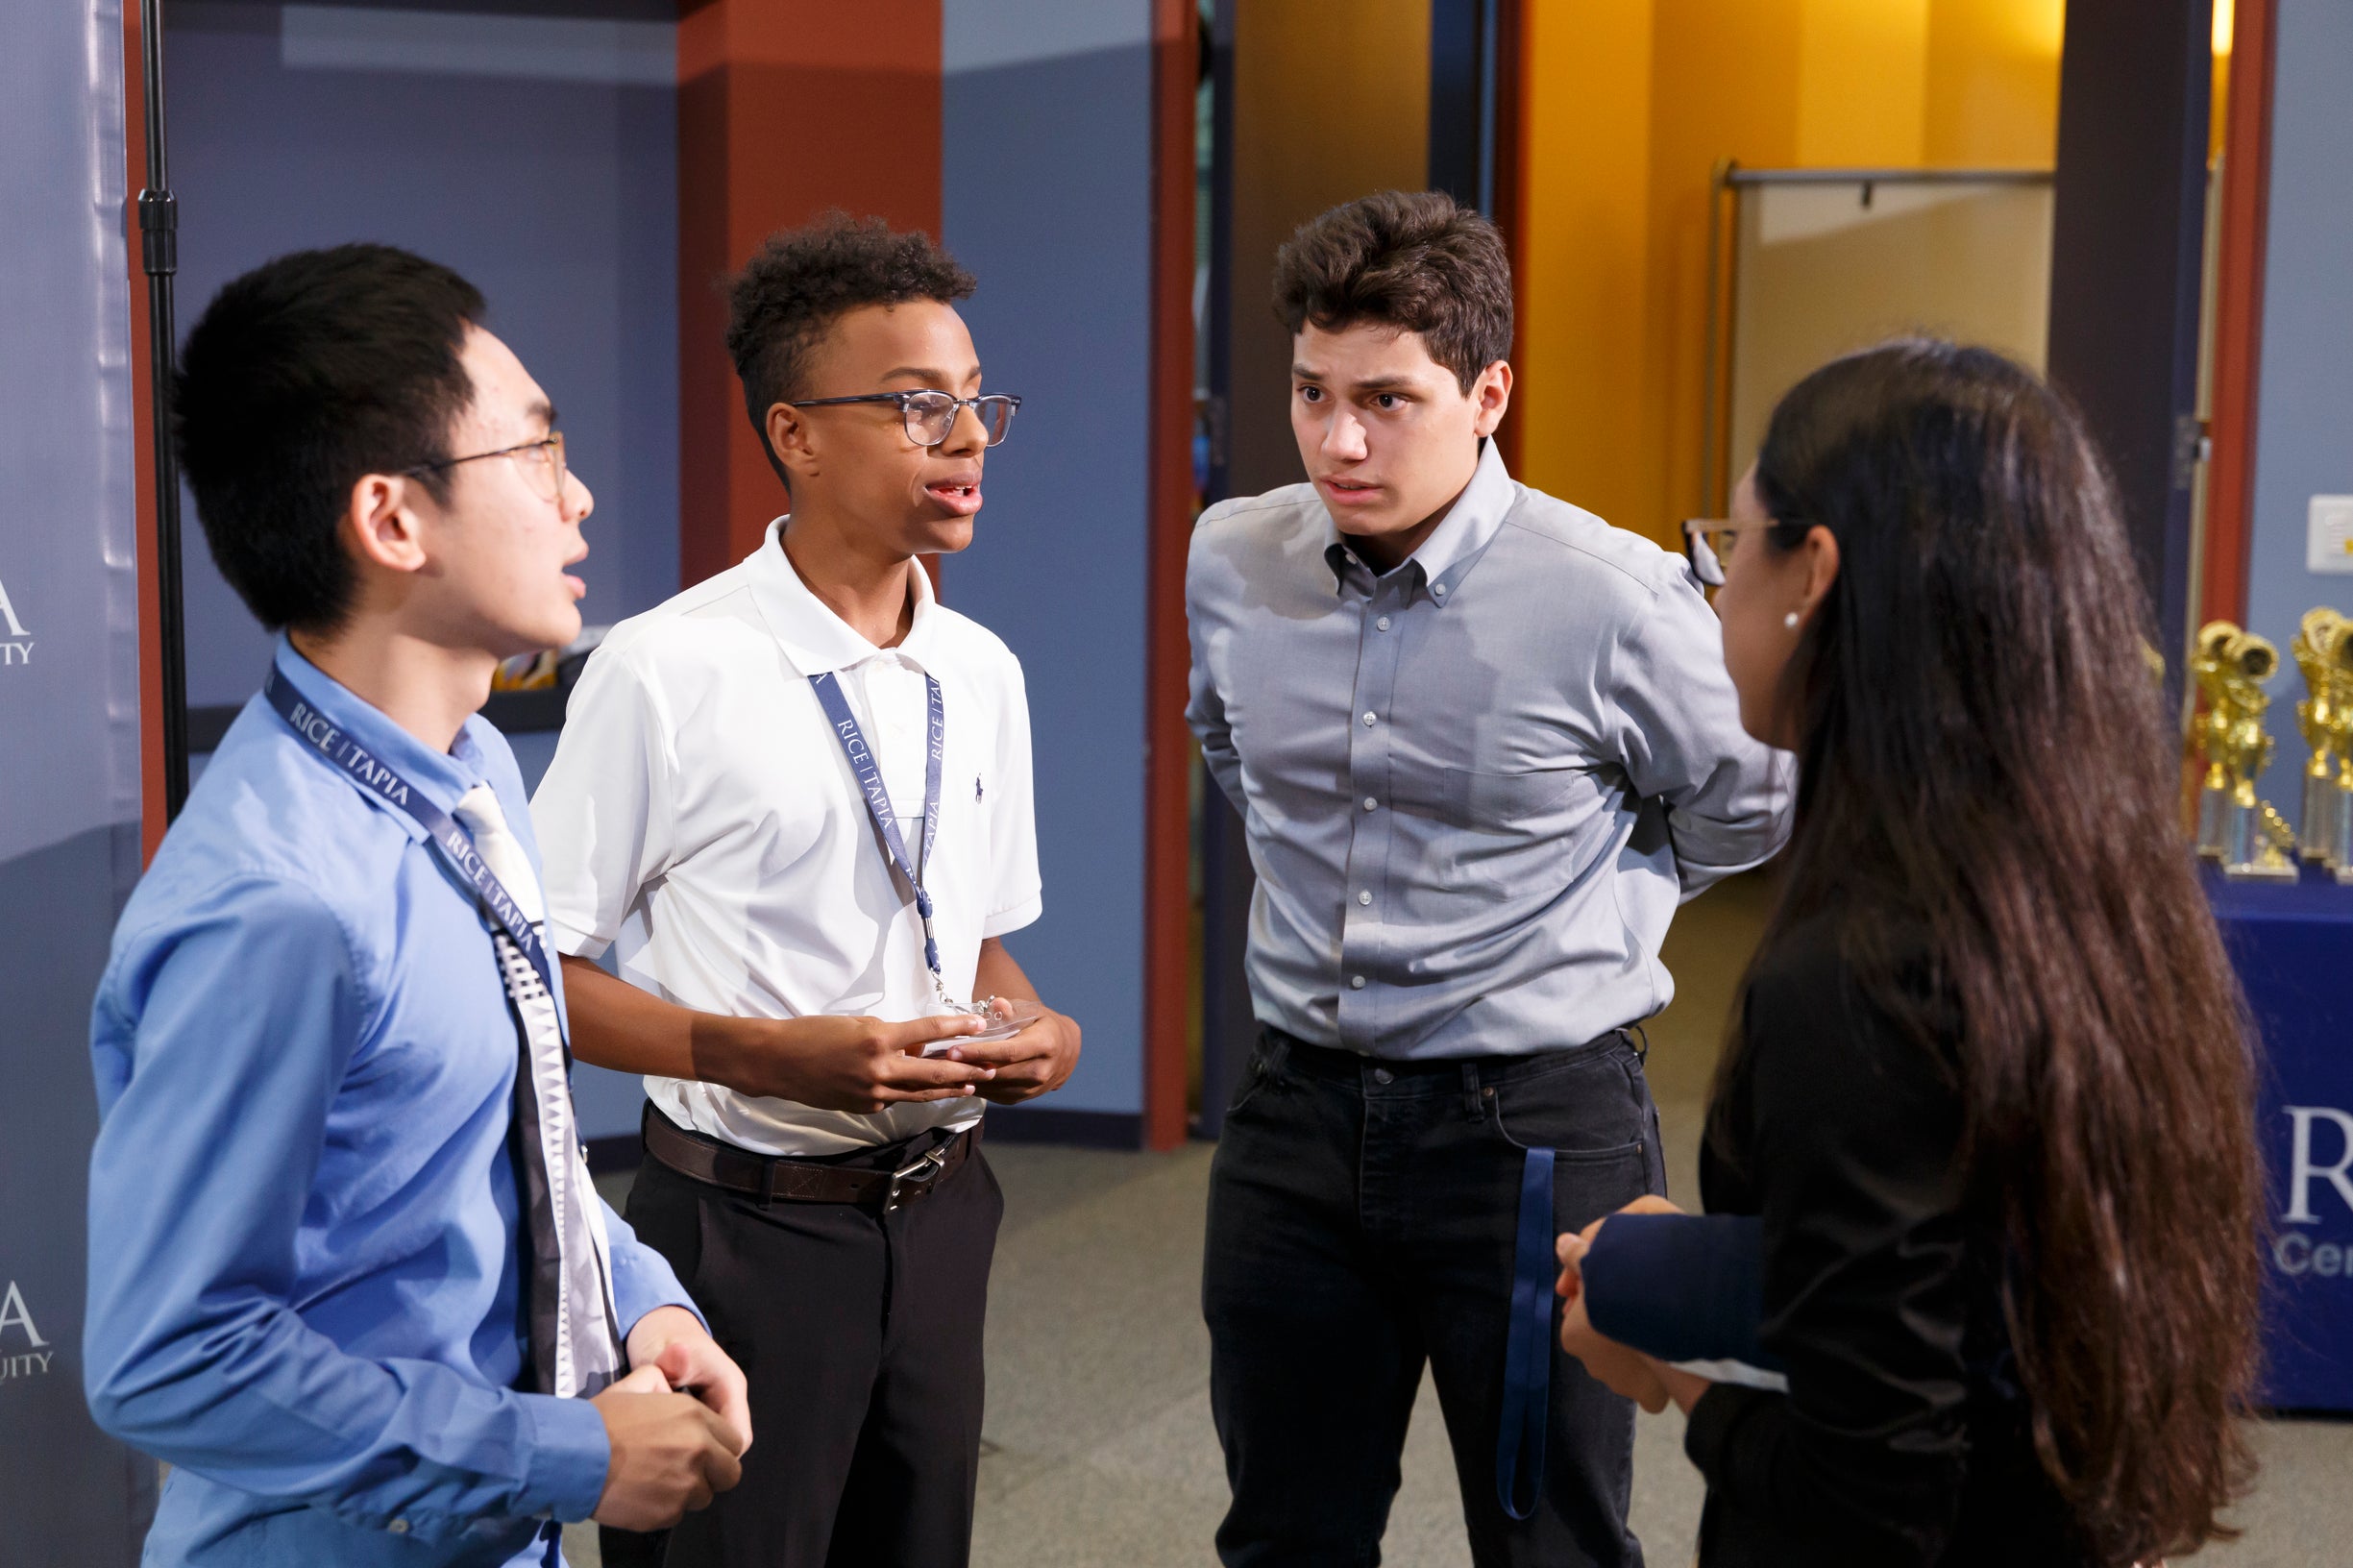 4 students preparing for presentation while standing in a group.